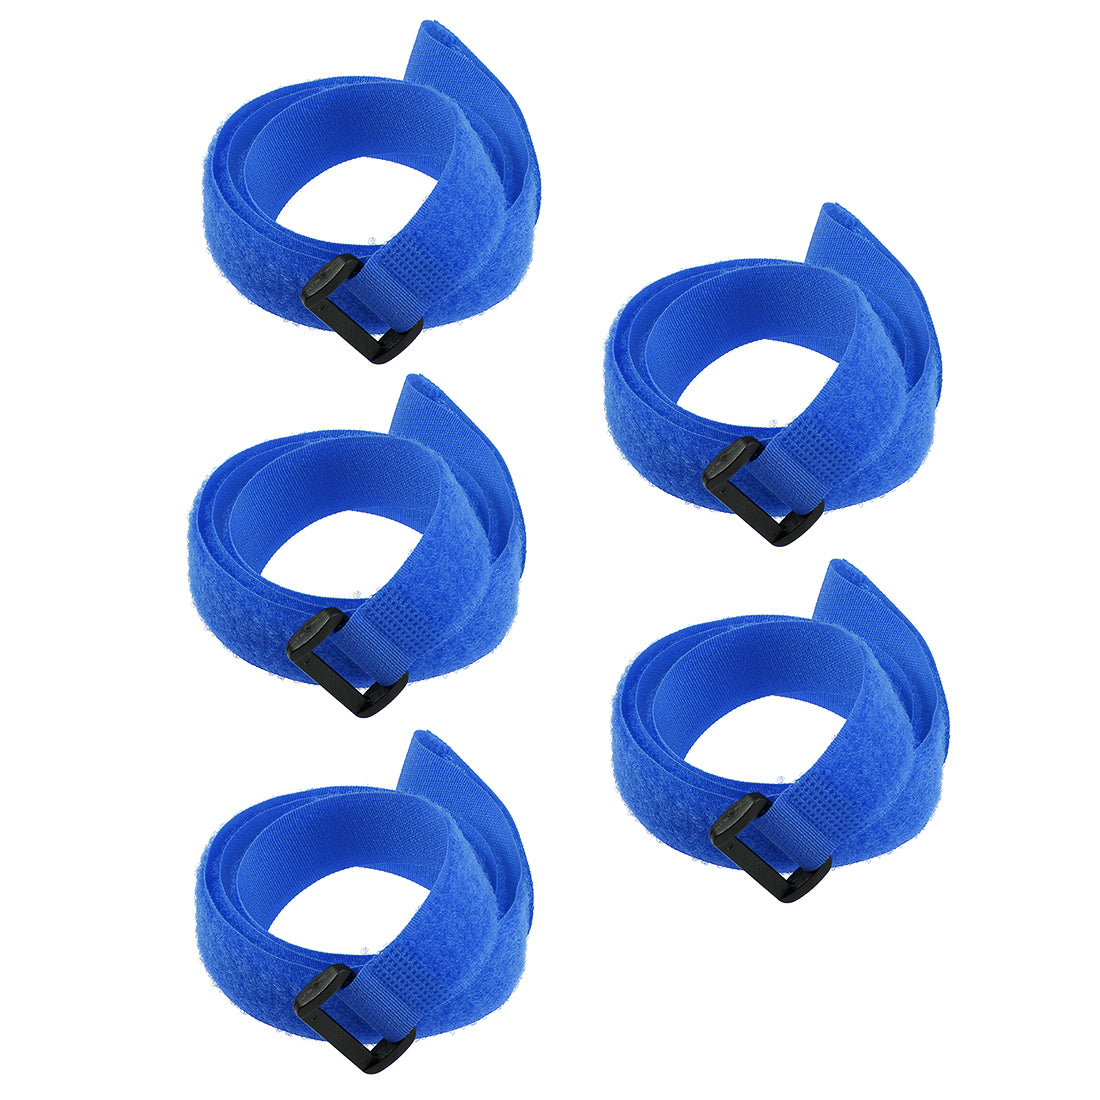 uxcell Uxcell 5pcs Hook and Loop Straps 1-inch x 31-inch Securing Straps Cable Tie (Blue)